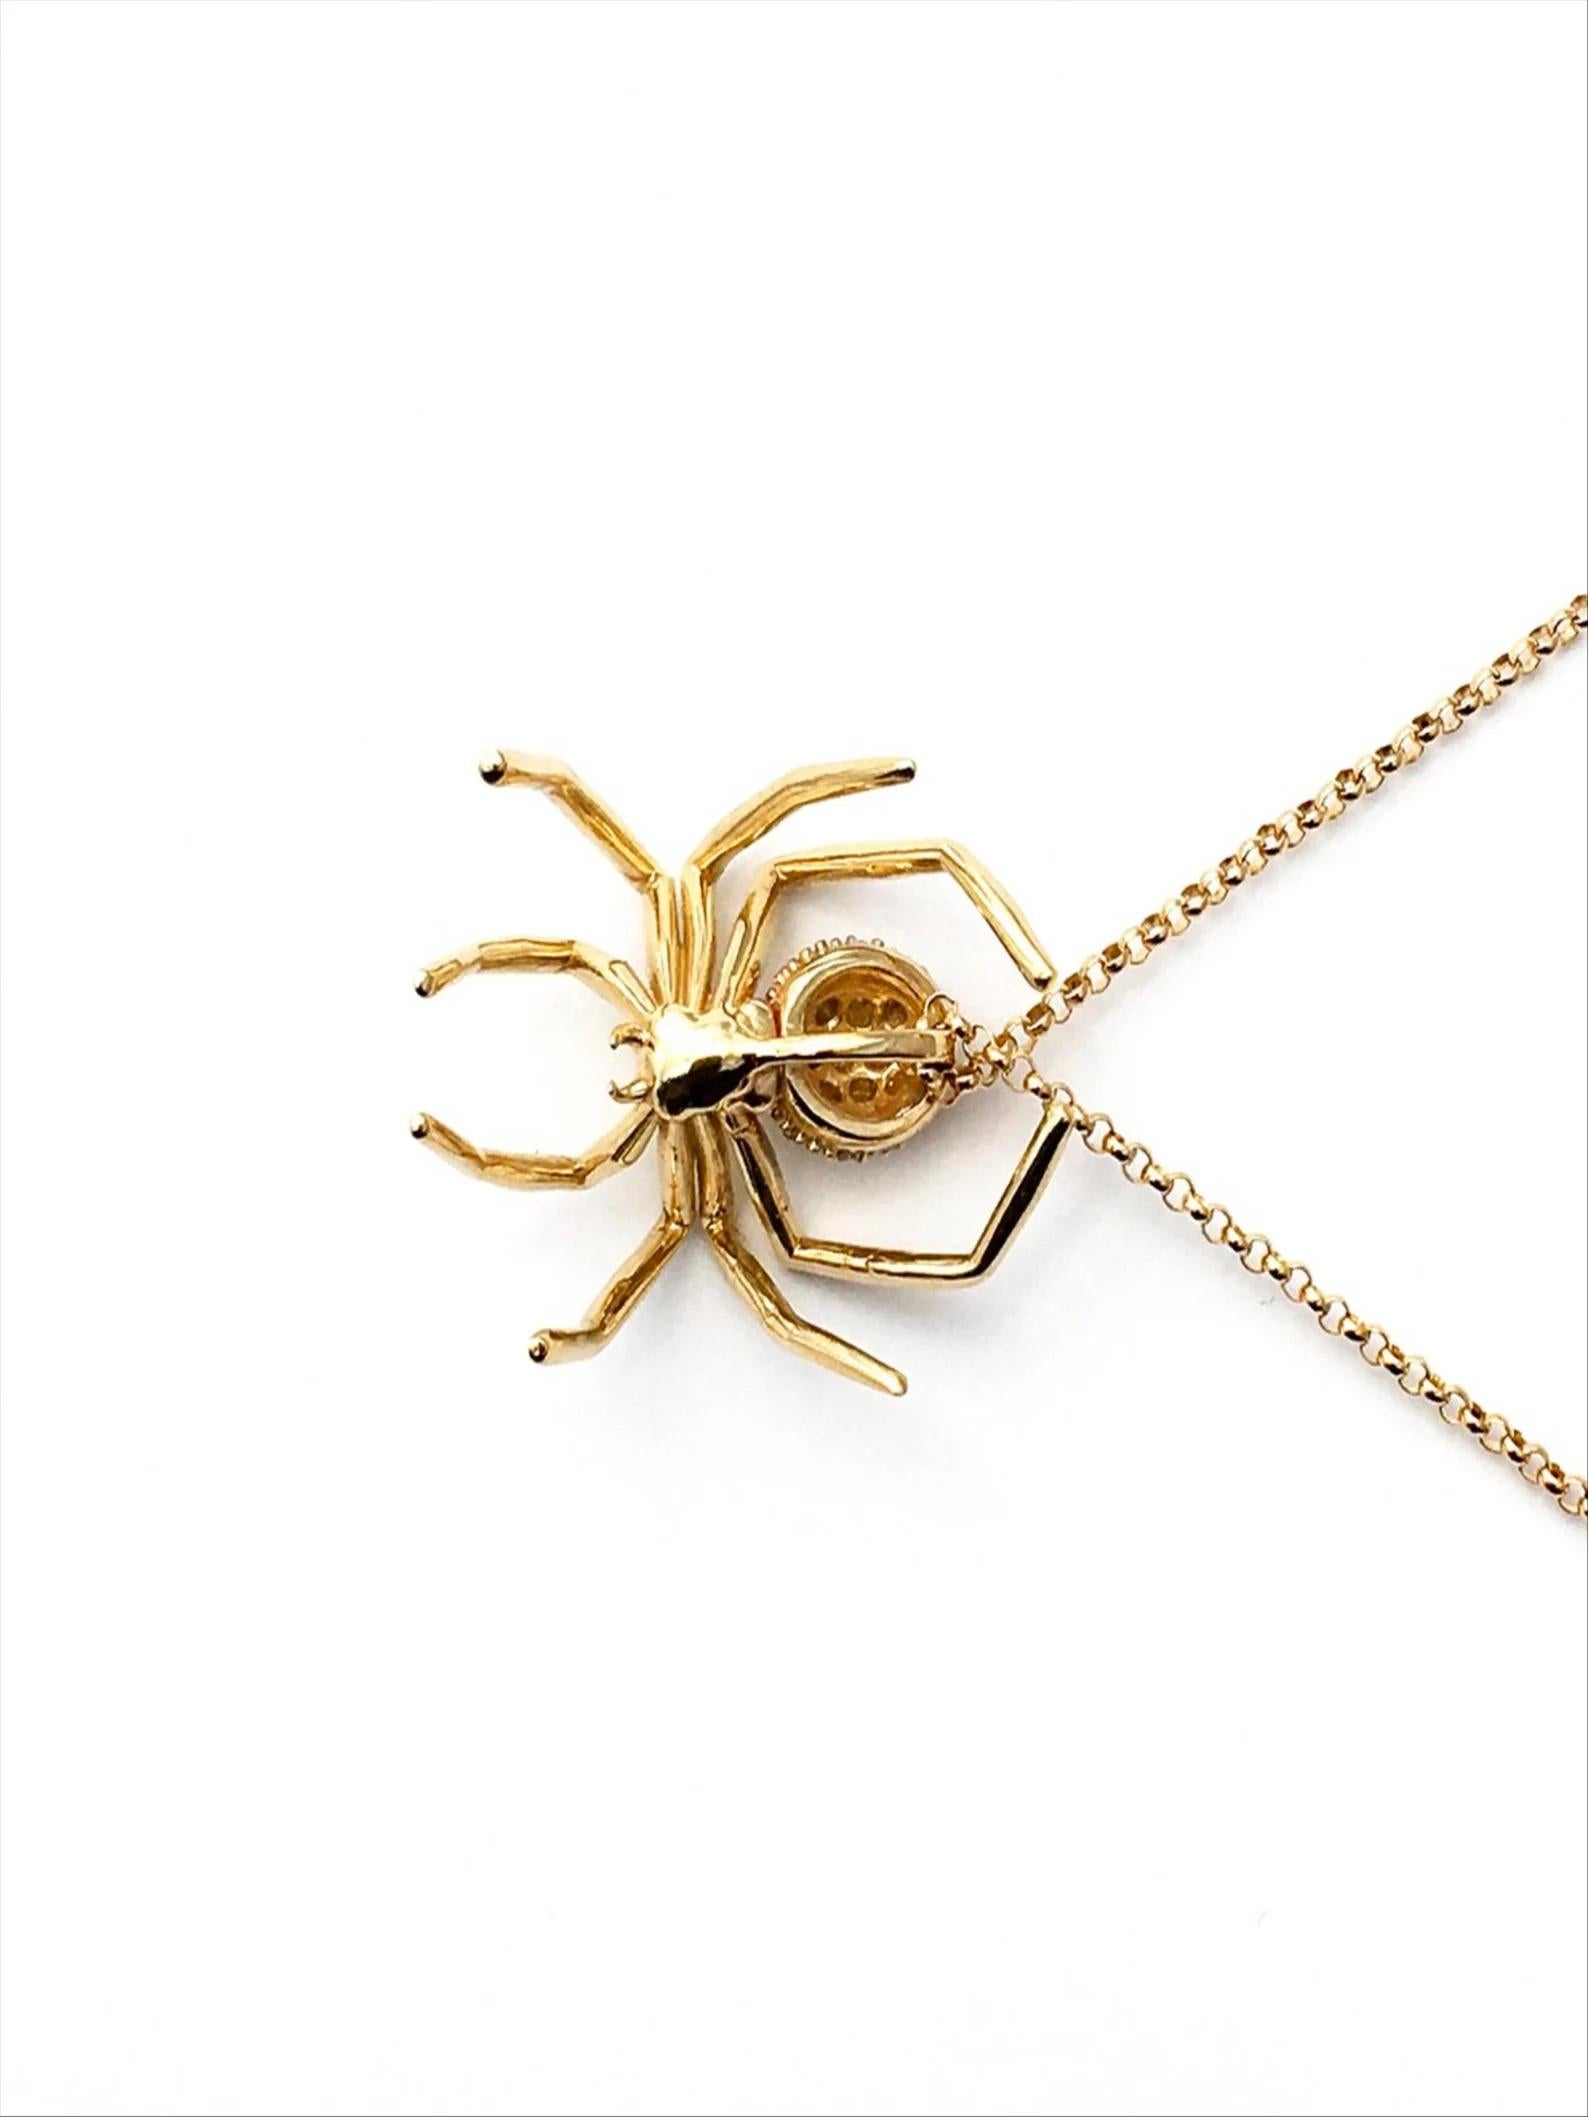 Introducing this Spider Pendant Yellow Gold Plated White Sapphires  - a piece of jewelry that will add a touch of intrigue and elegance to any outfit. Crafted with the finest materials, this pendant is a true work of art.

At first glance, the